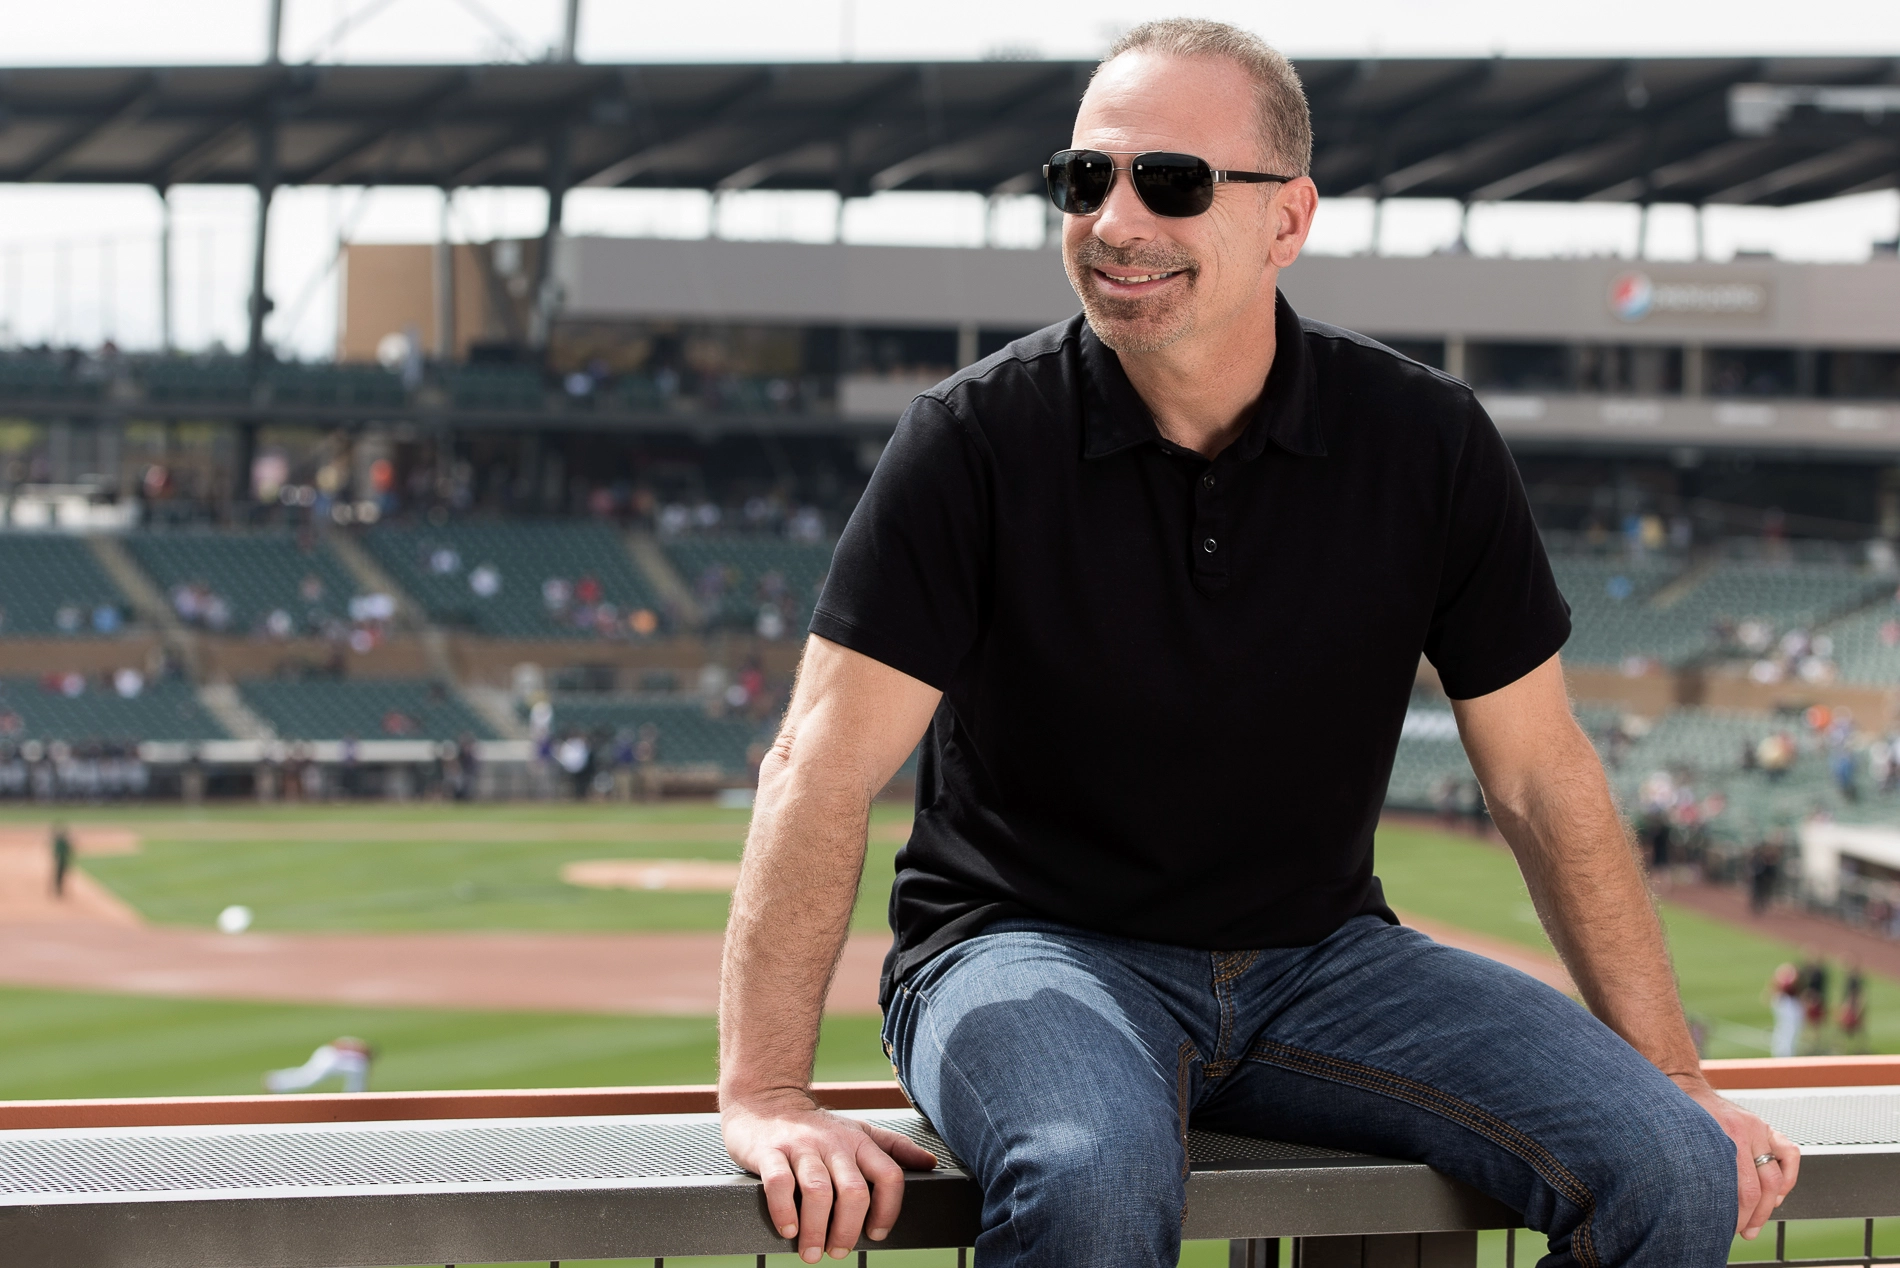 Gambo relaxing at a ballpark with sunglasses